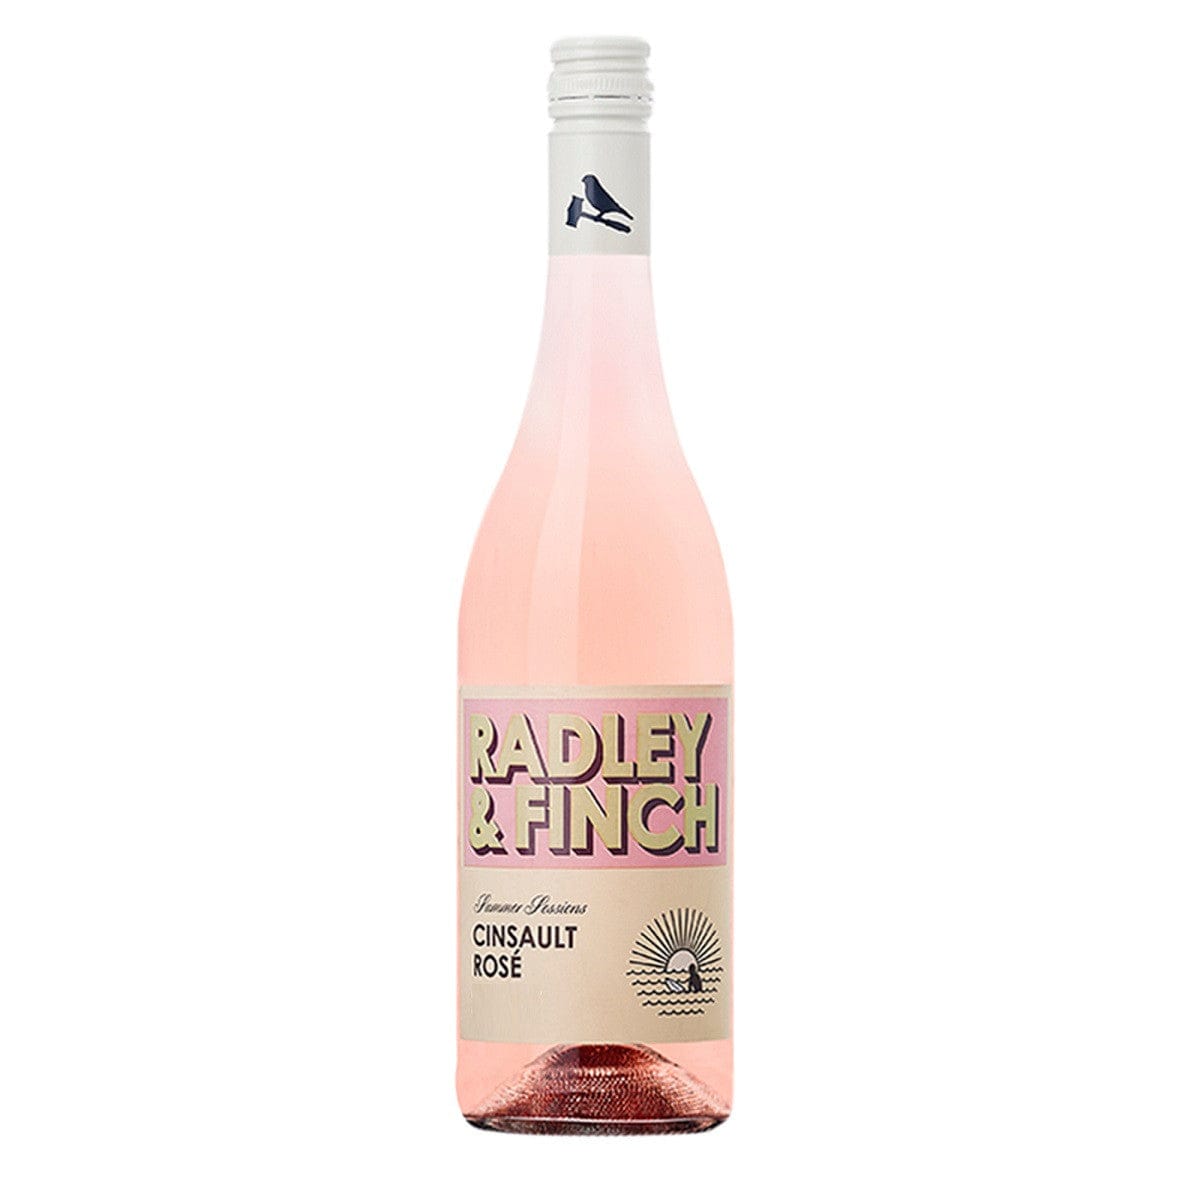 Radley & Finch Summer Sessions Cinsault Rose – Triangle Wine Company